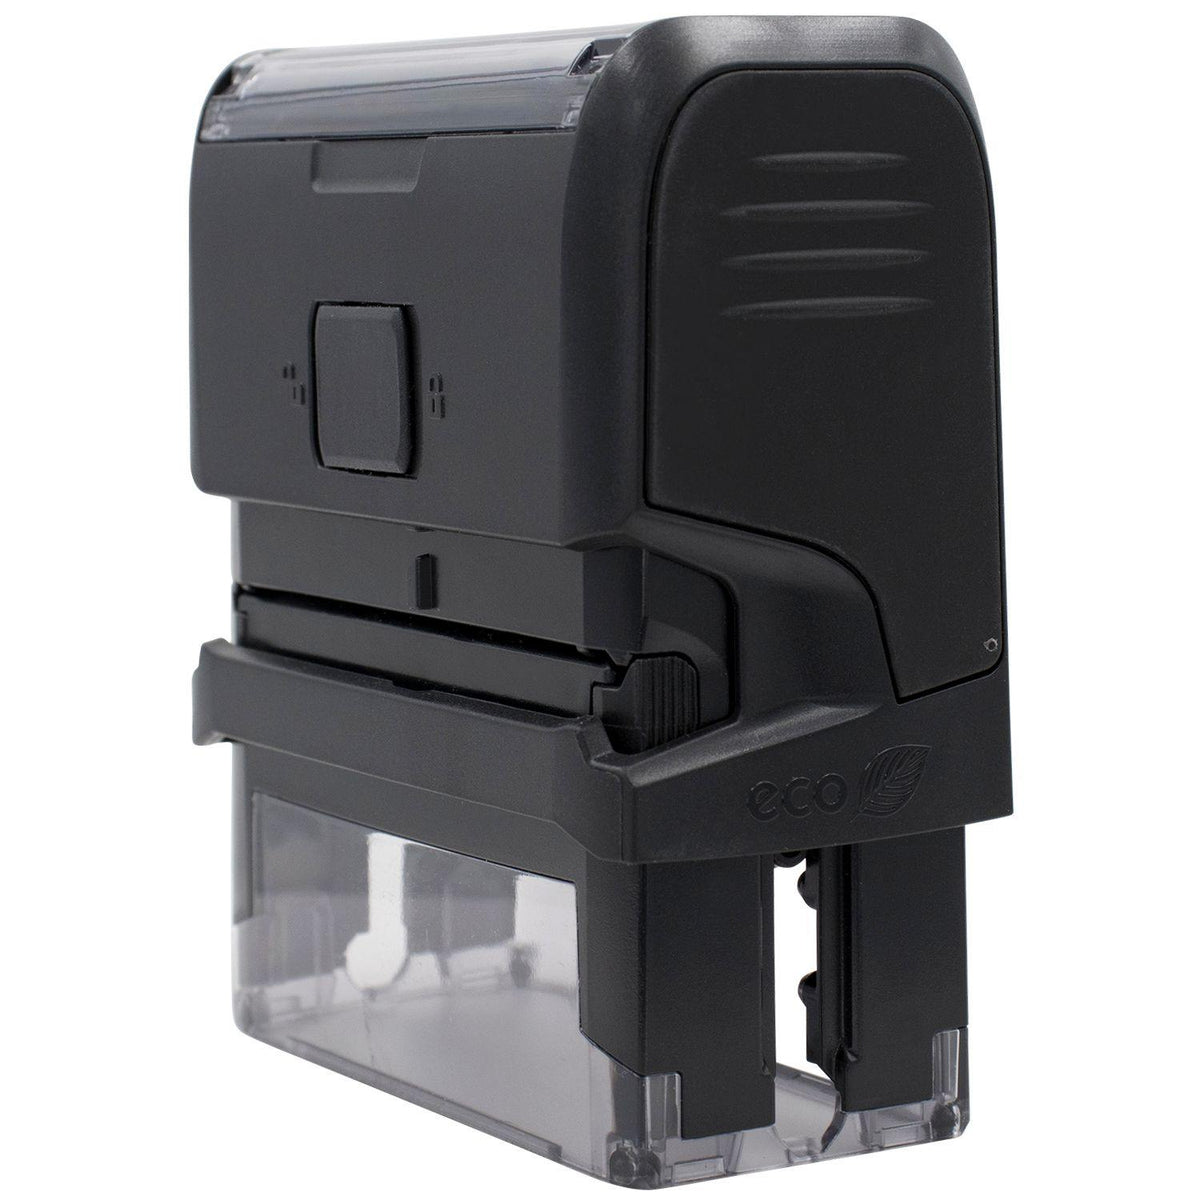 Self-Inking Bold Fragile Stamp - Engineer Seal Stamps - Brand_Trodat, Impression Size_Small, Stamp Type_Self-Inking Stamp, Type of Use_Postal &amp; Mailing